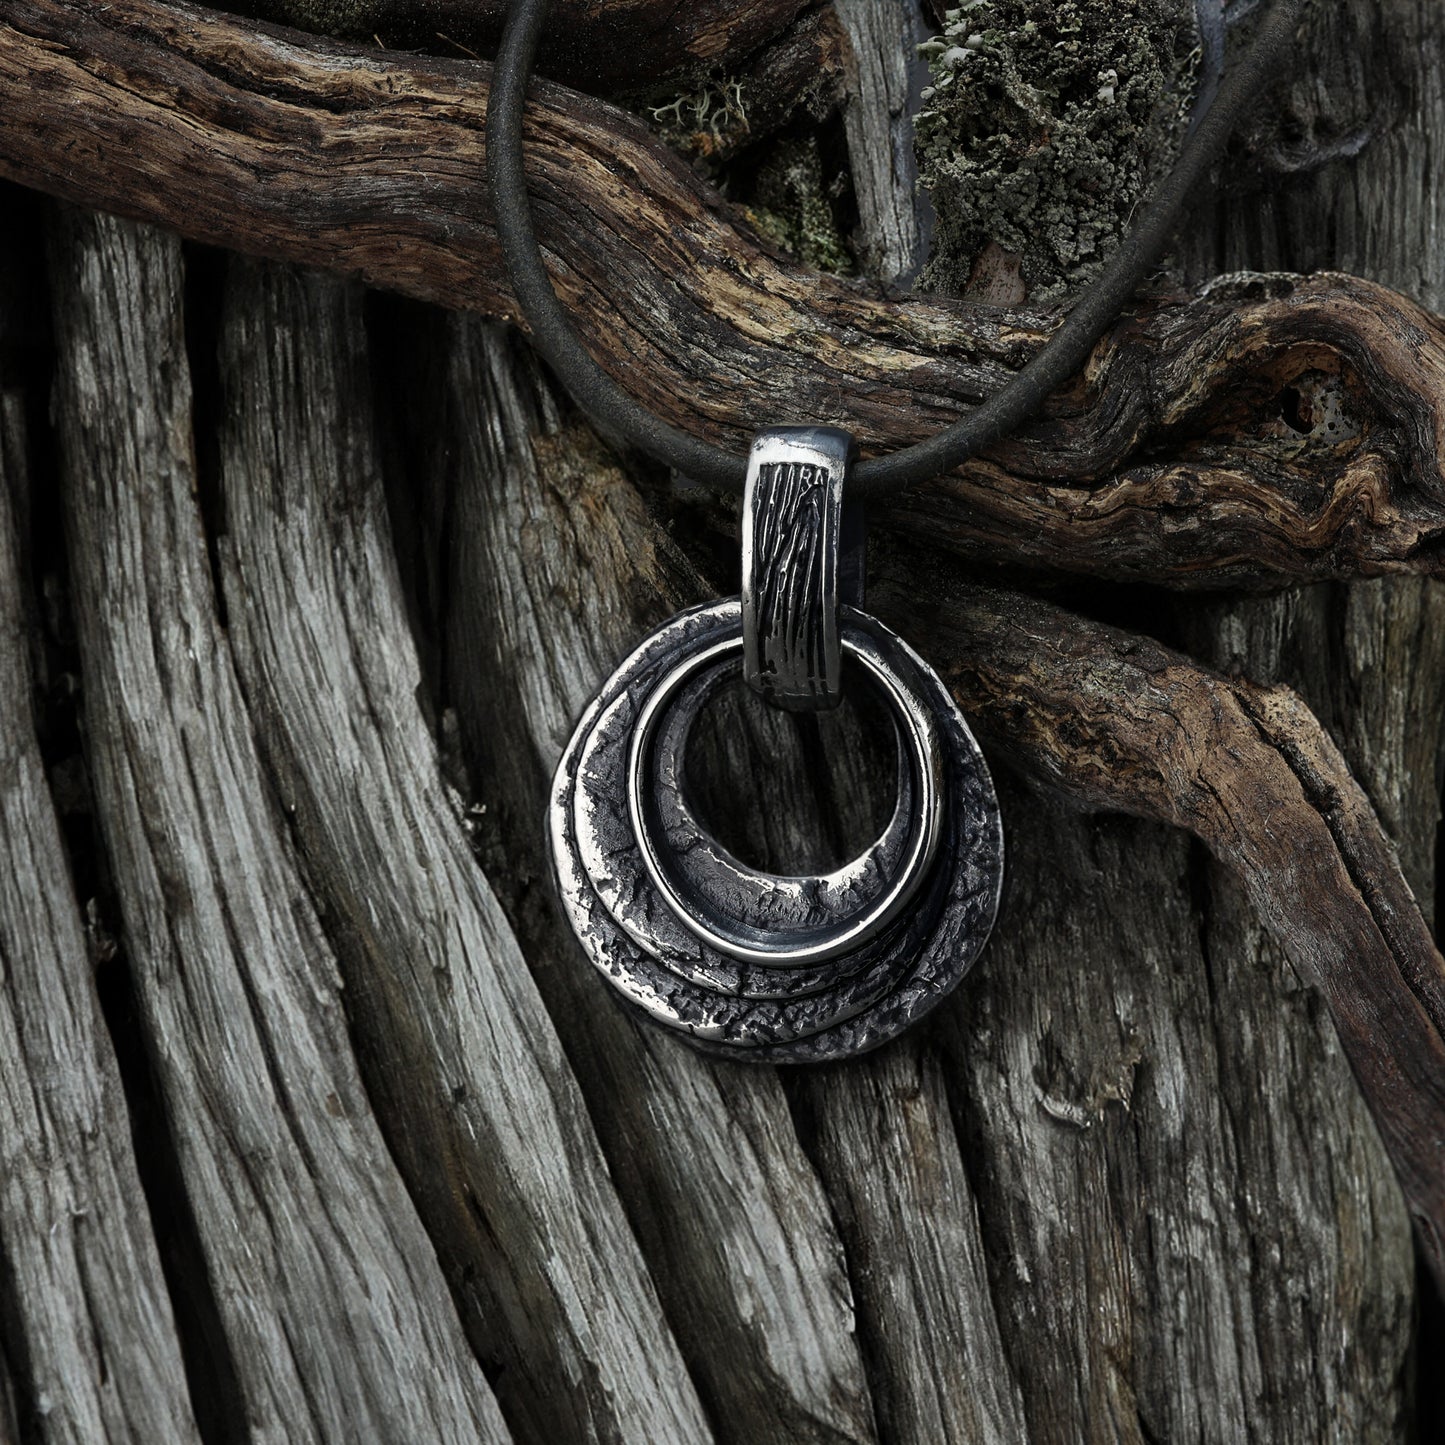 Find your Pagan and Viking connection with this round sterling silver pendant, online for you.